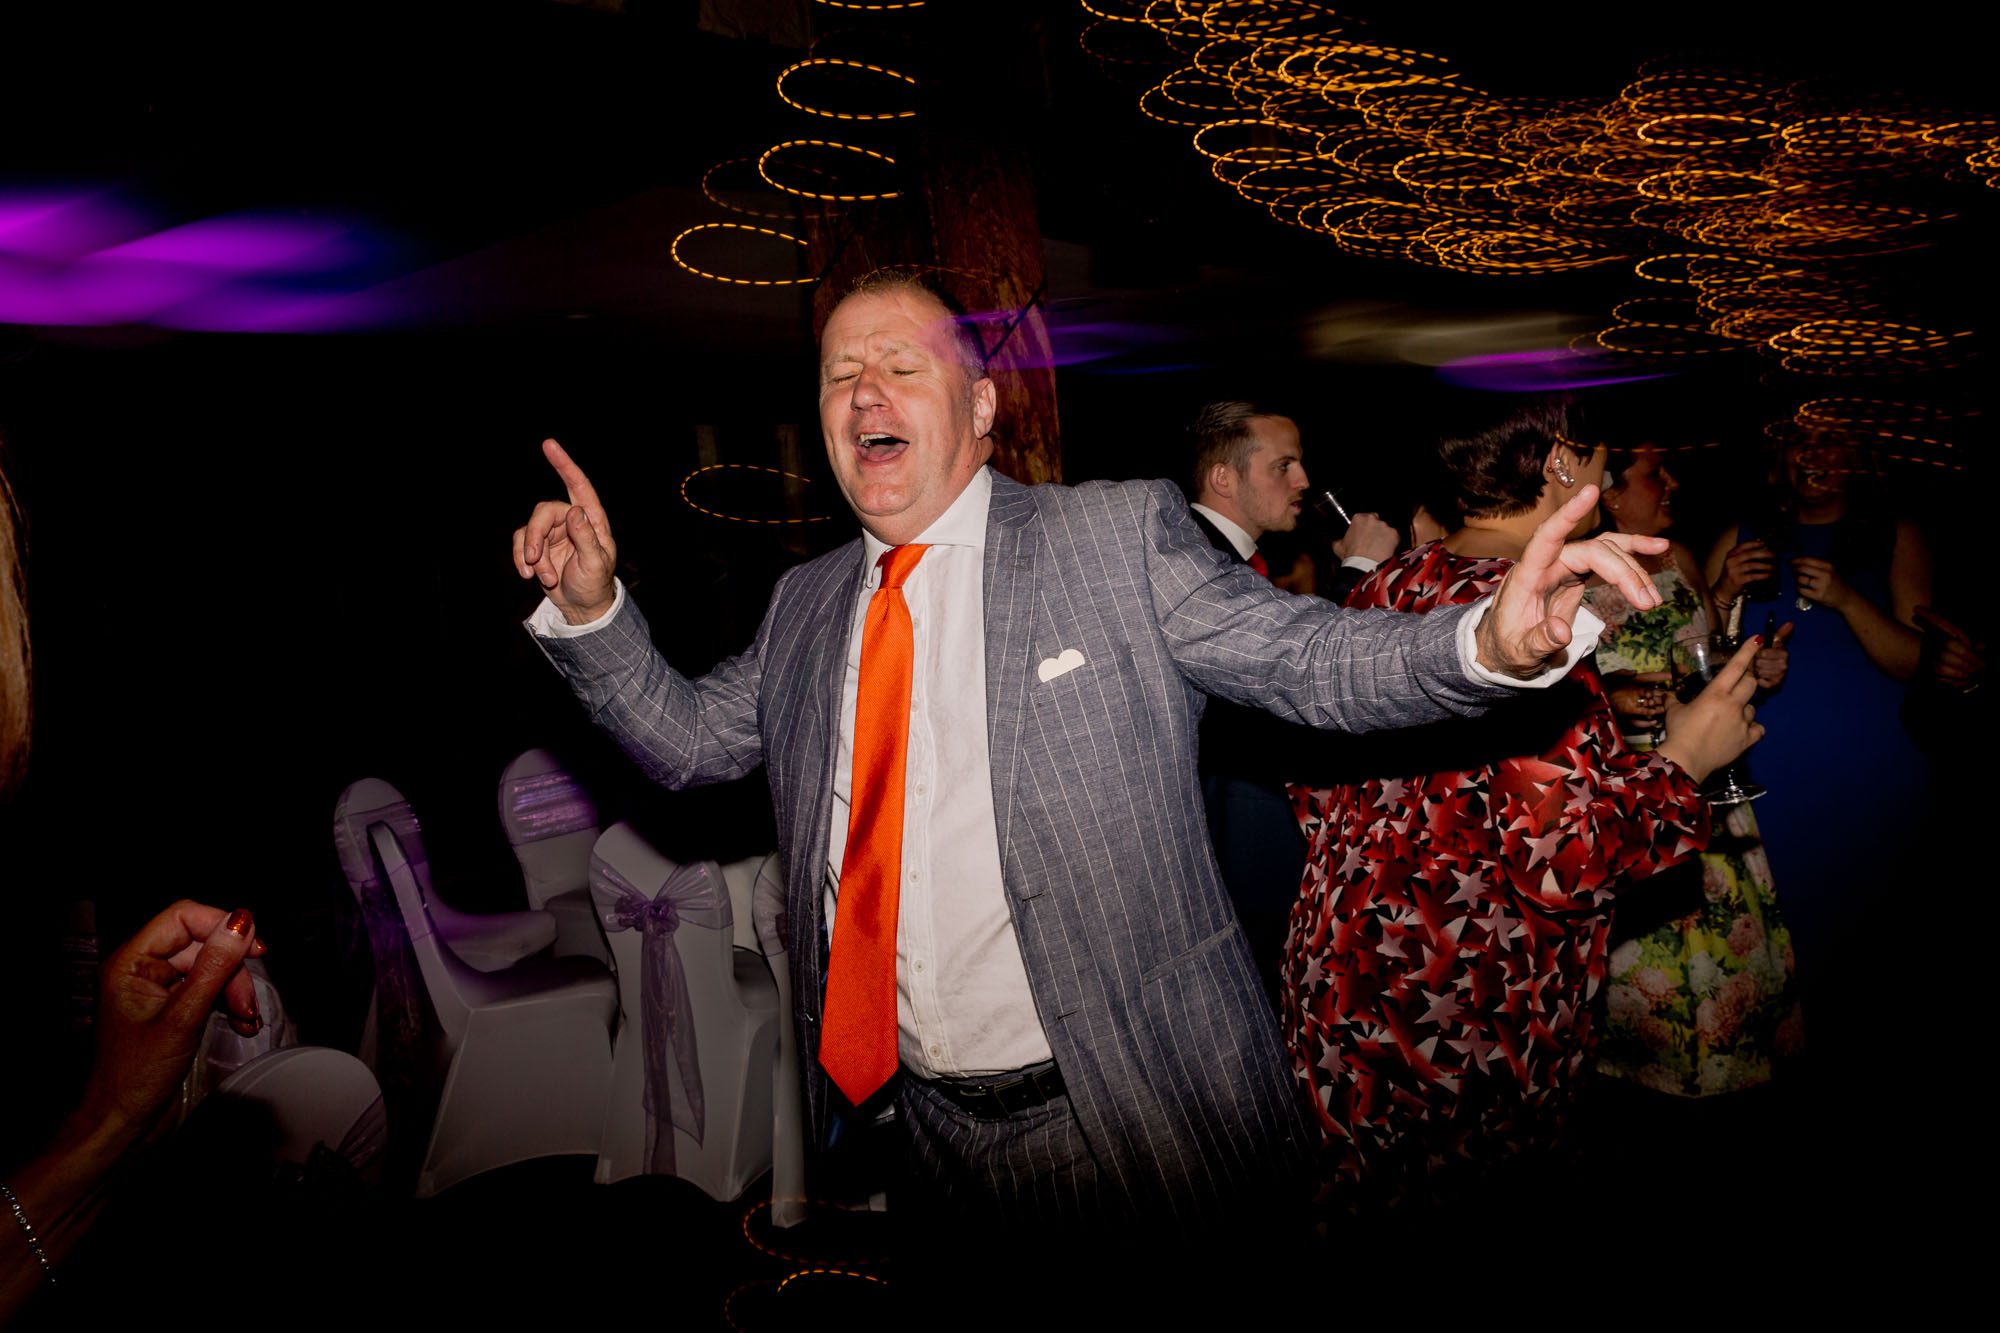 A guest dancing on the dance floor at a wedding at Great Fosters.